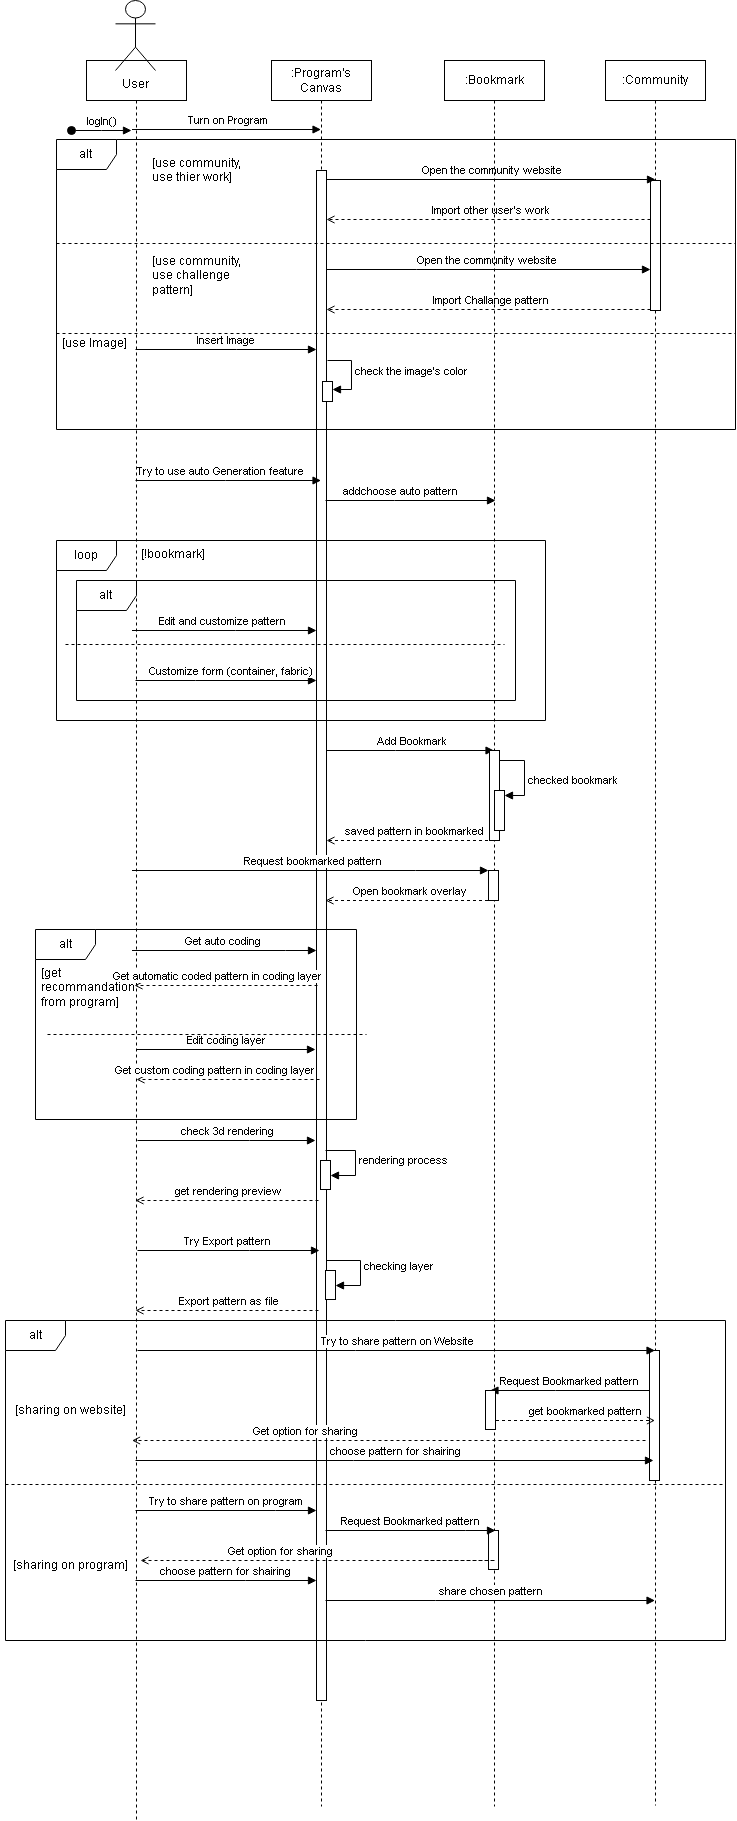 Sequence Diagram image